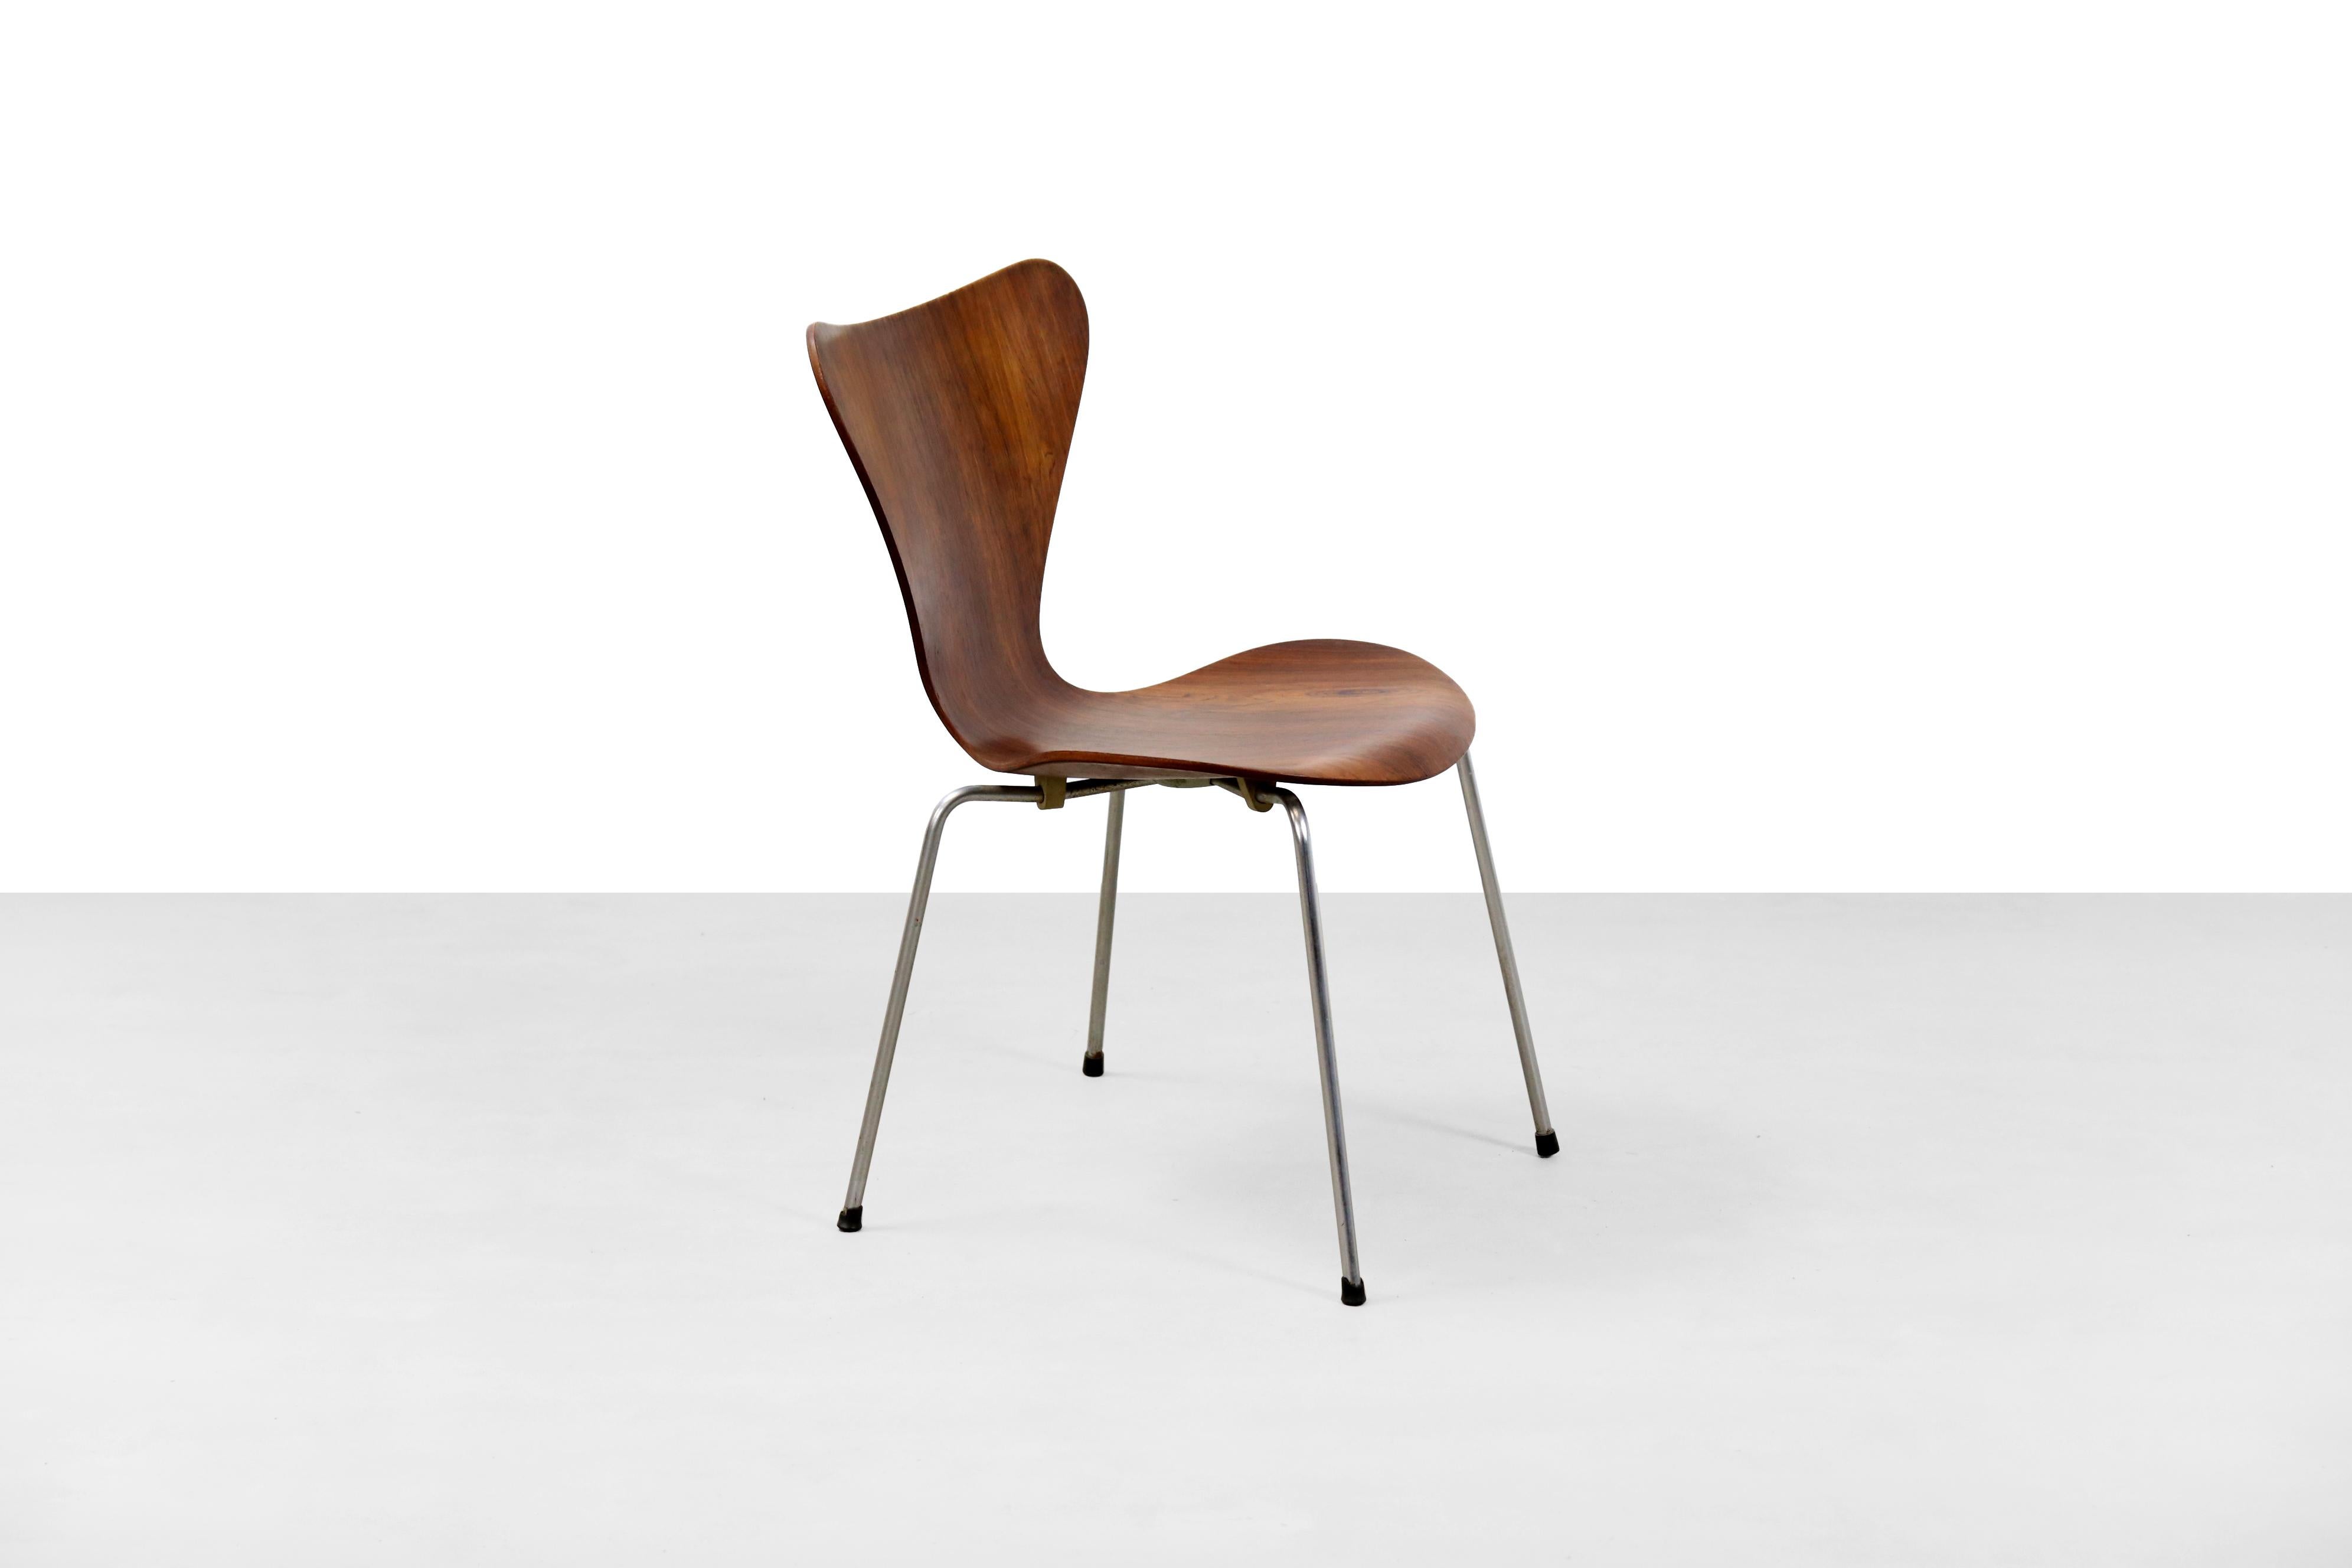 Beautiful old butterfly chair designed by Arne Jacobsen for Fritz Hansen. 
This series 7 chair is equipped with very beautiful Brazilian Rosewood veneer with exceptional beautiful drawing in the woodgrain. This dining room chair is marked